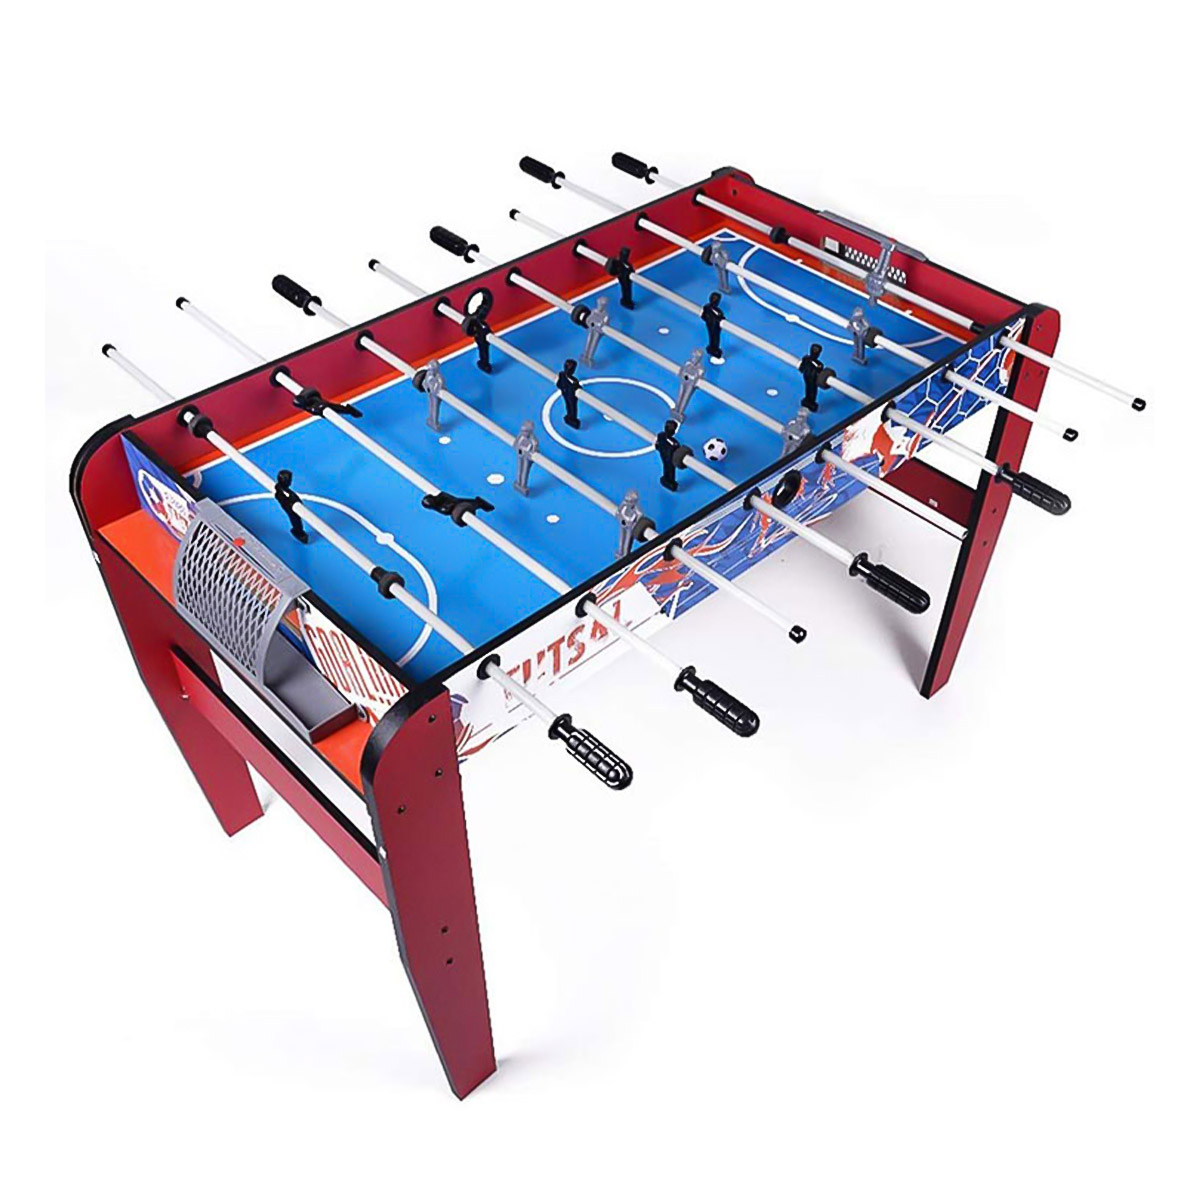 https://www.winmaxdartgame.com/table-football-4ft-foosball-table-with-8-pole-children-wooden-educational-indoor-game-toy-product/